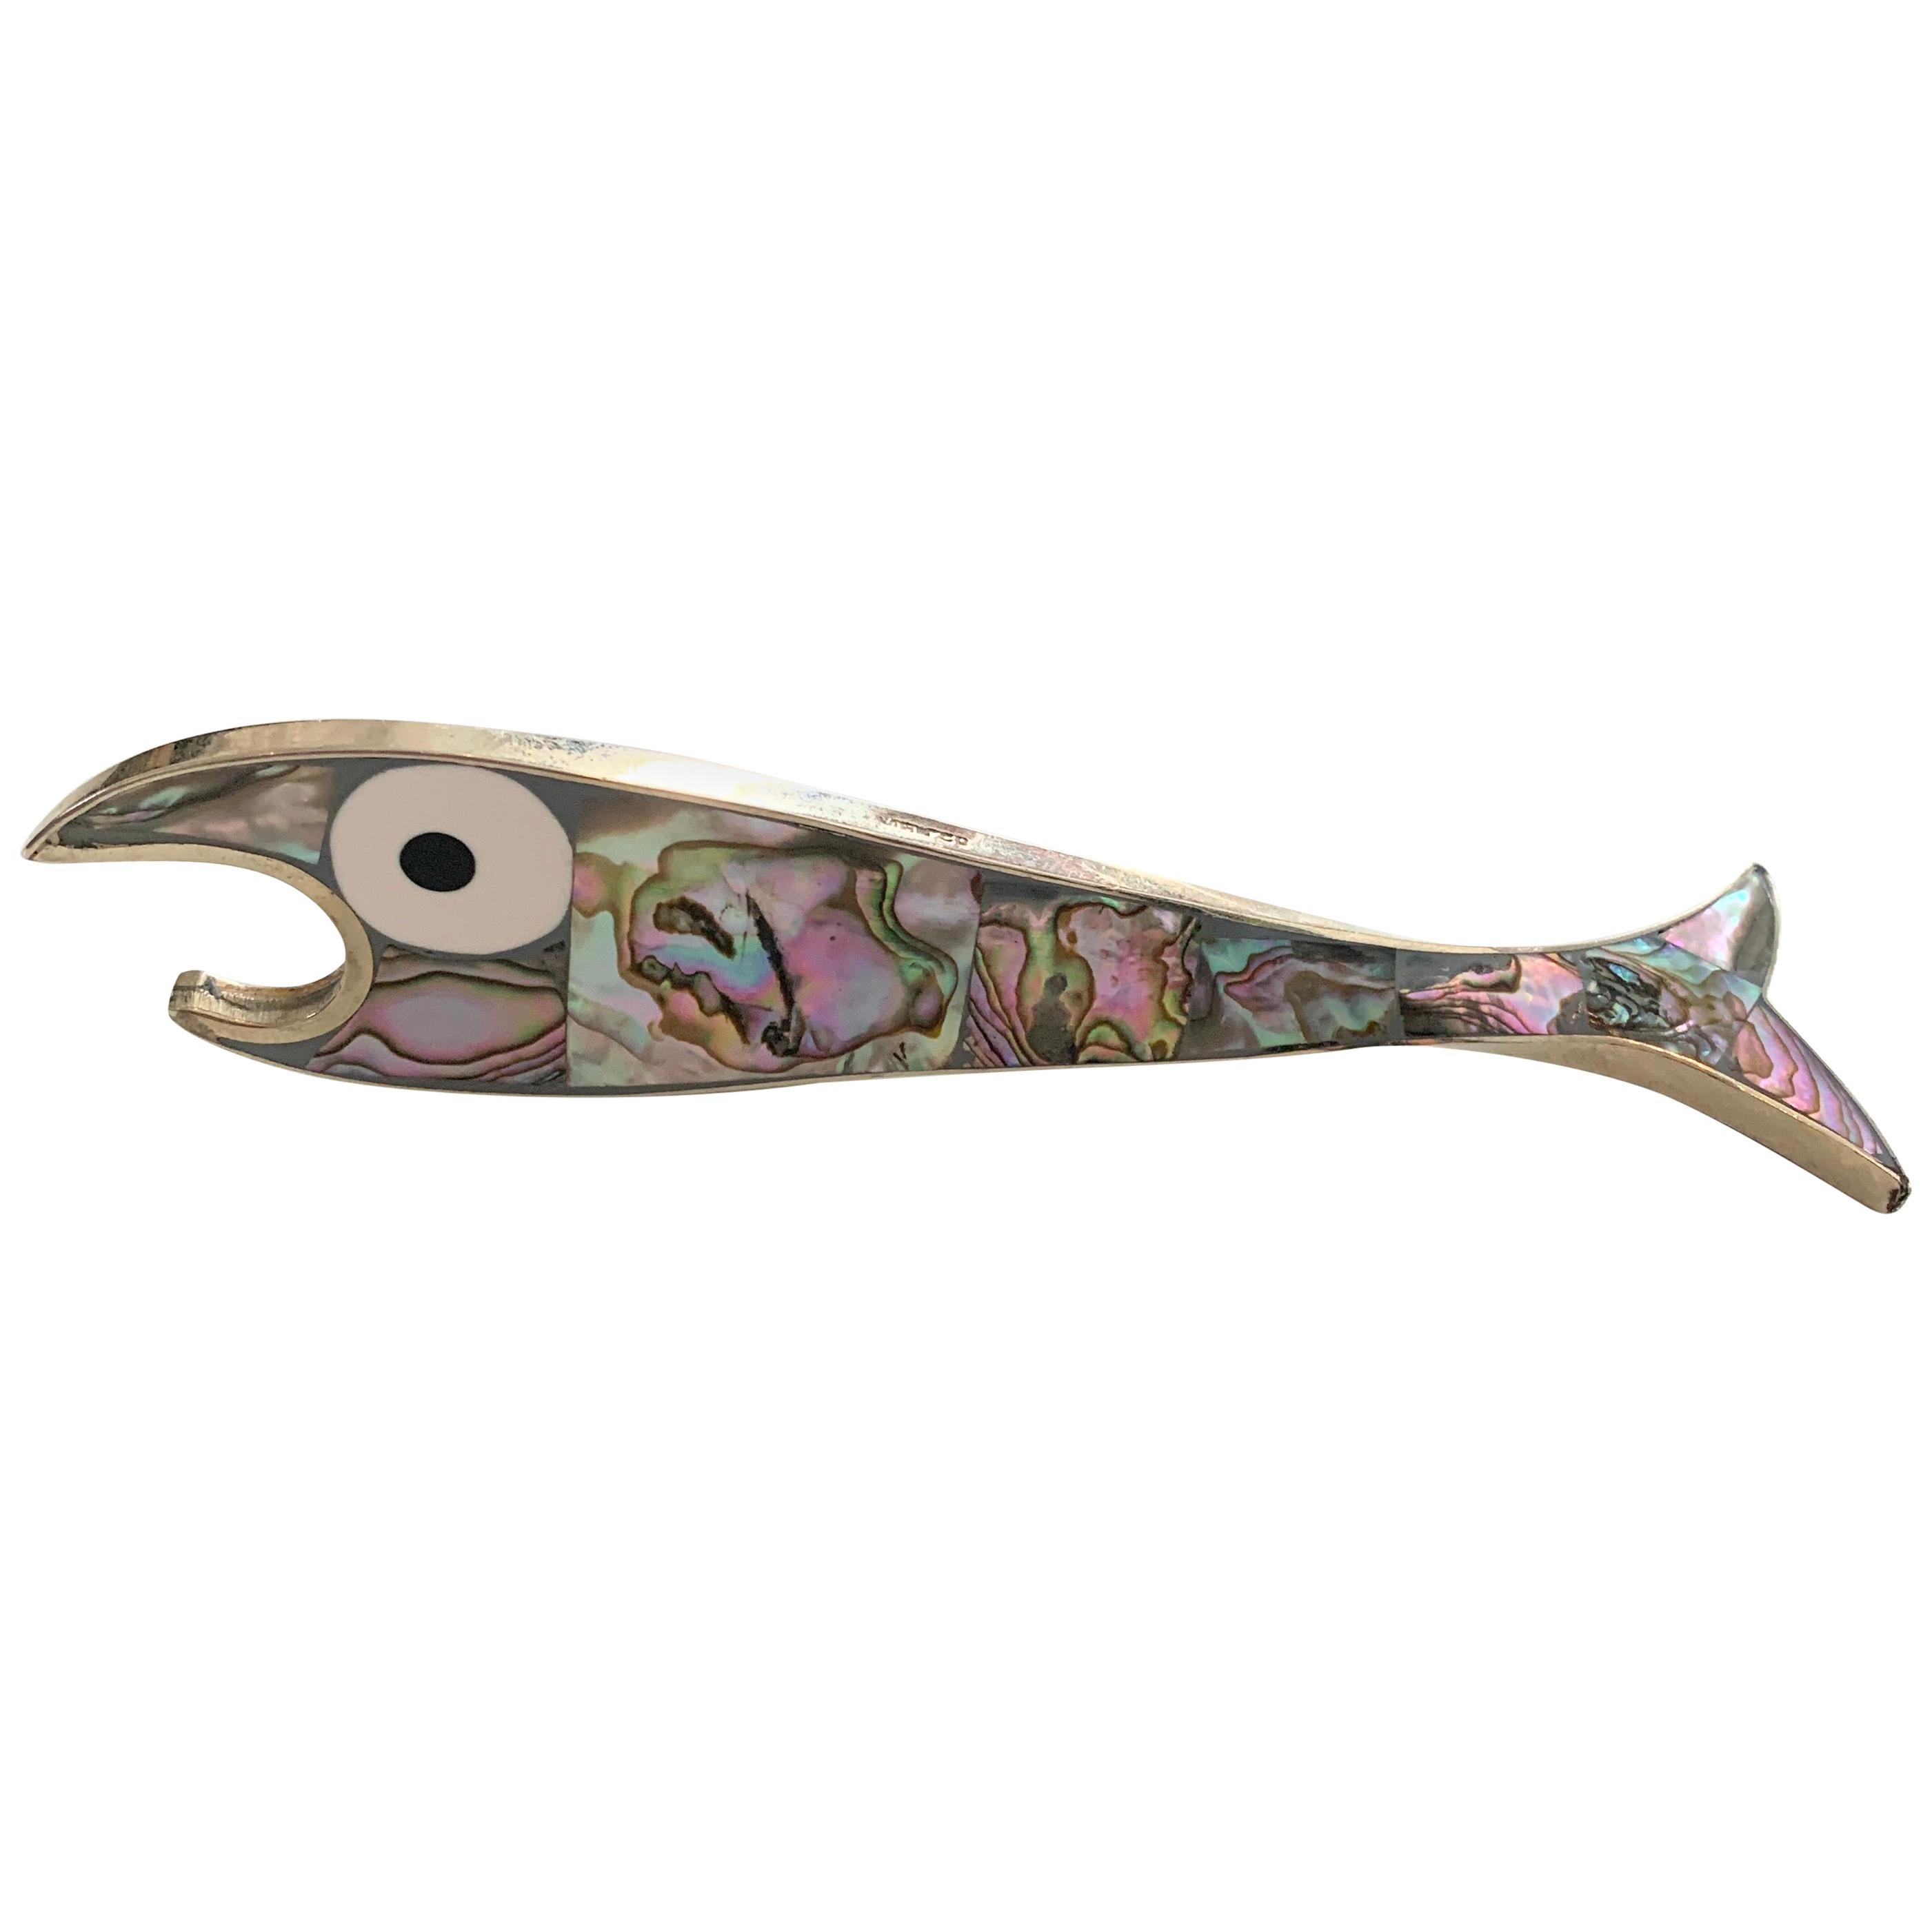 Mexican Silver Abalone Fish Shaped Bottle Opener